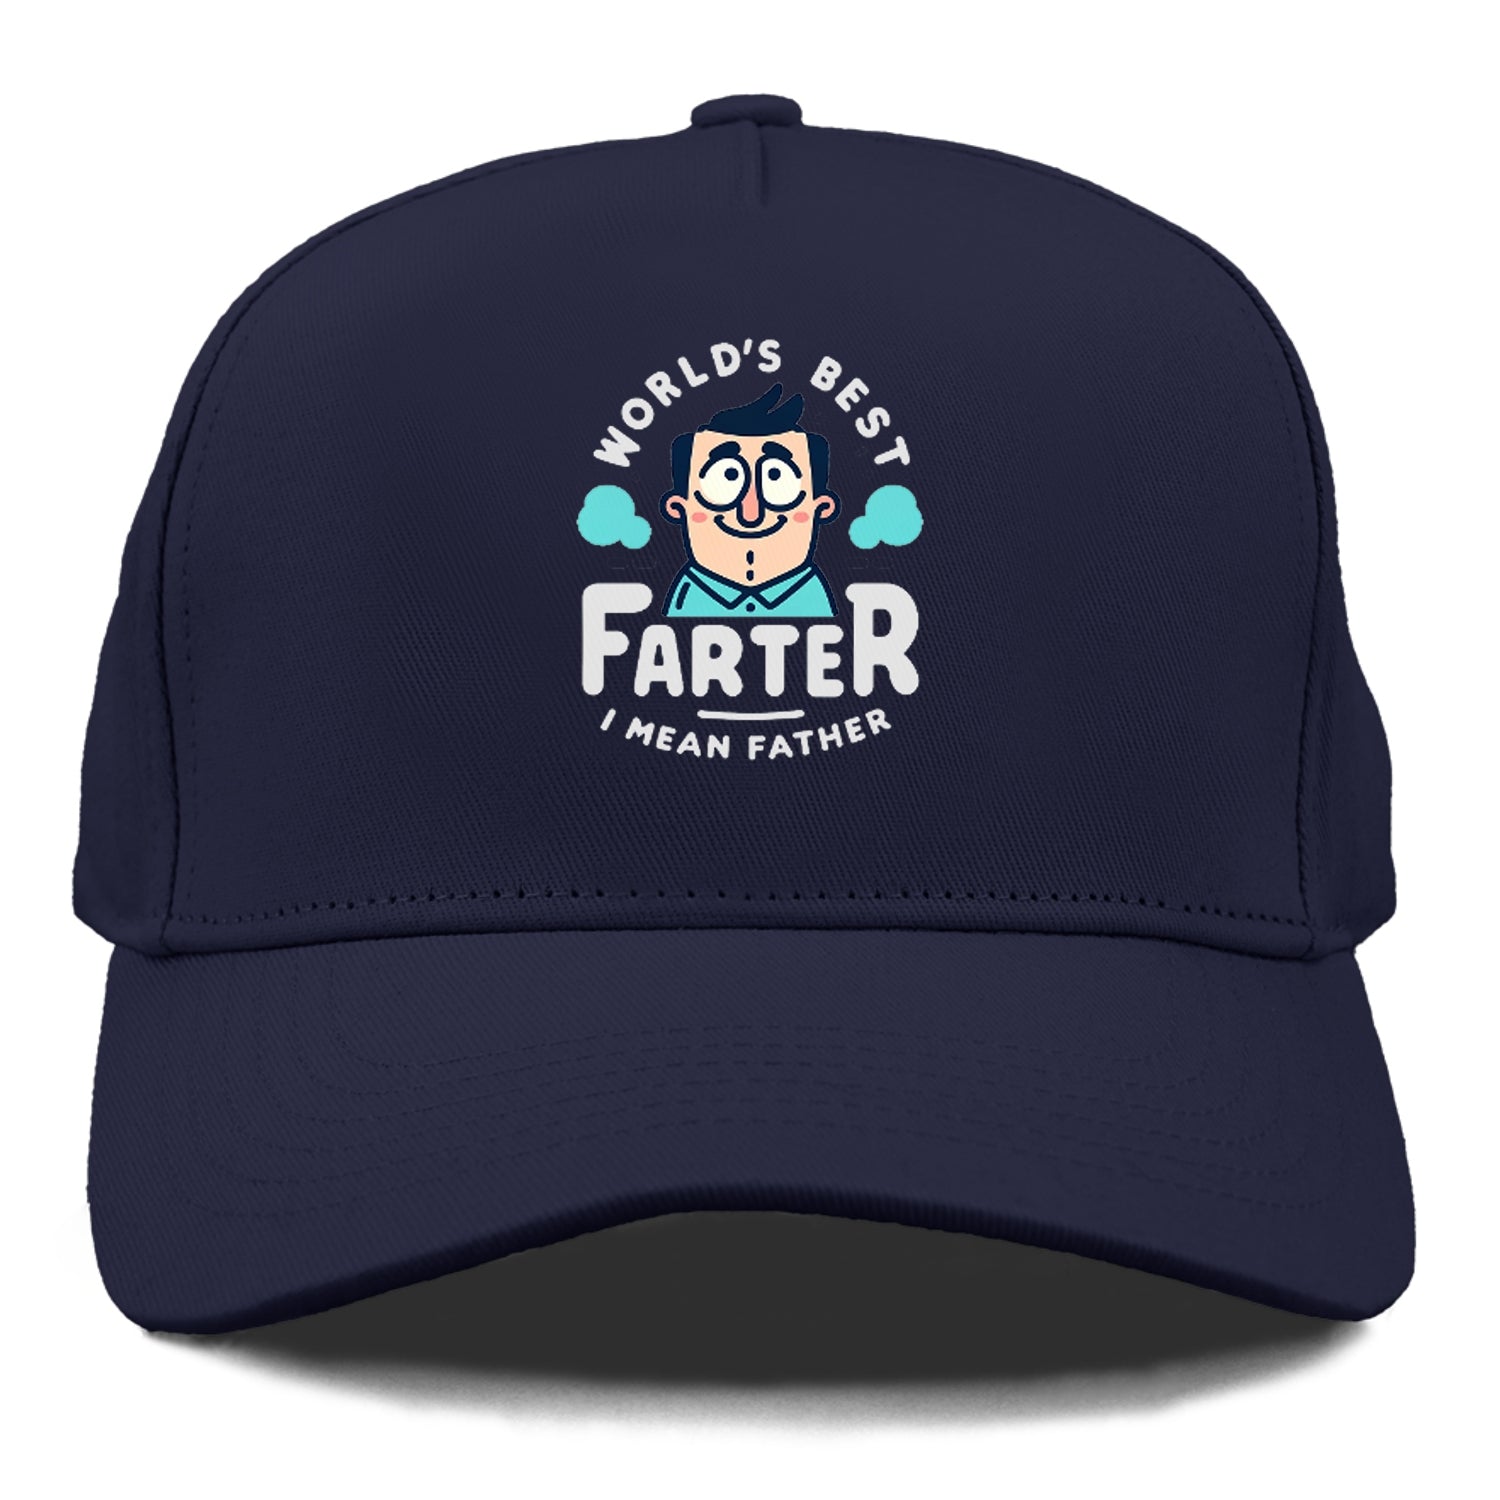 world's best farter i mean father Hat